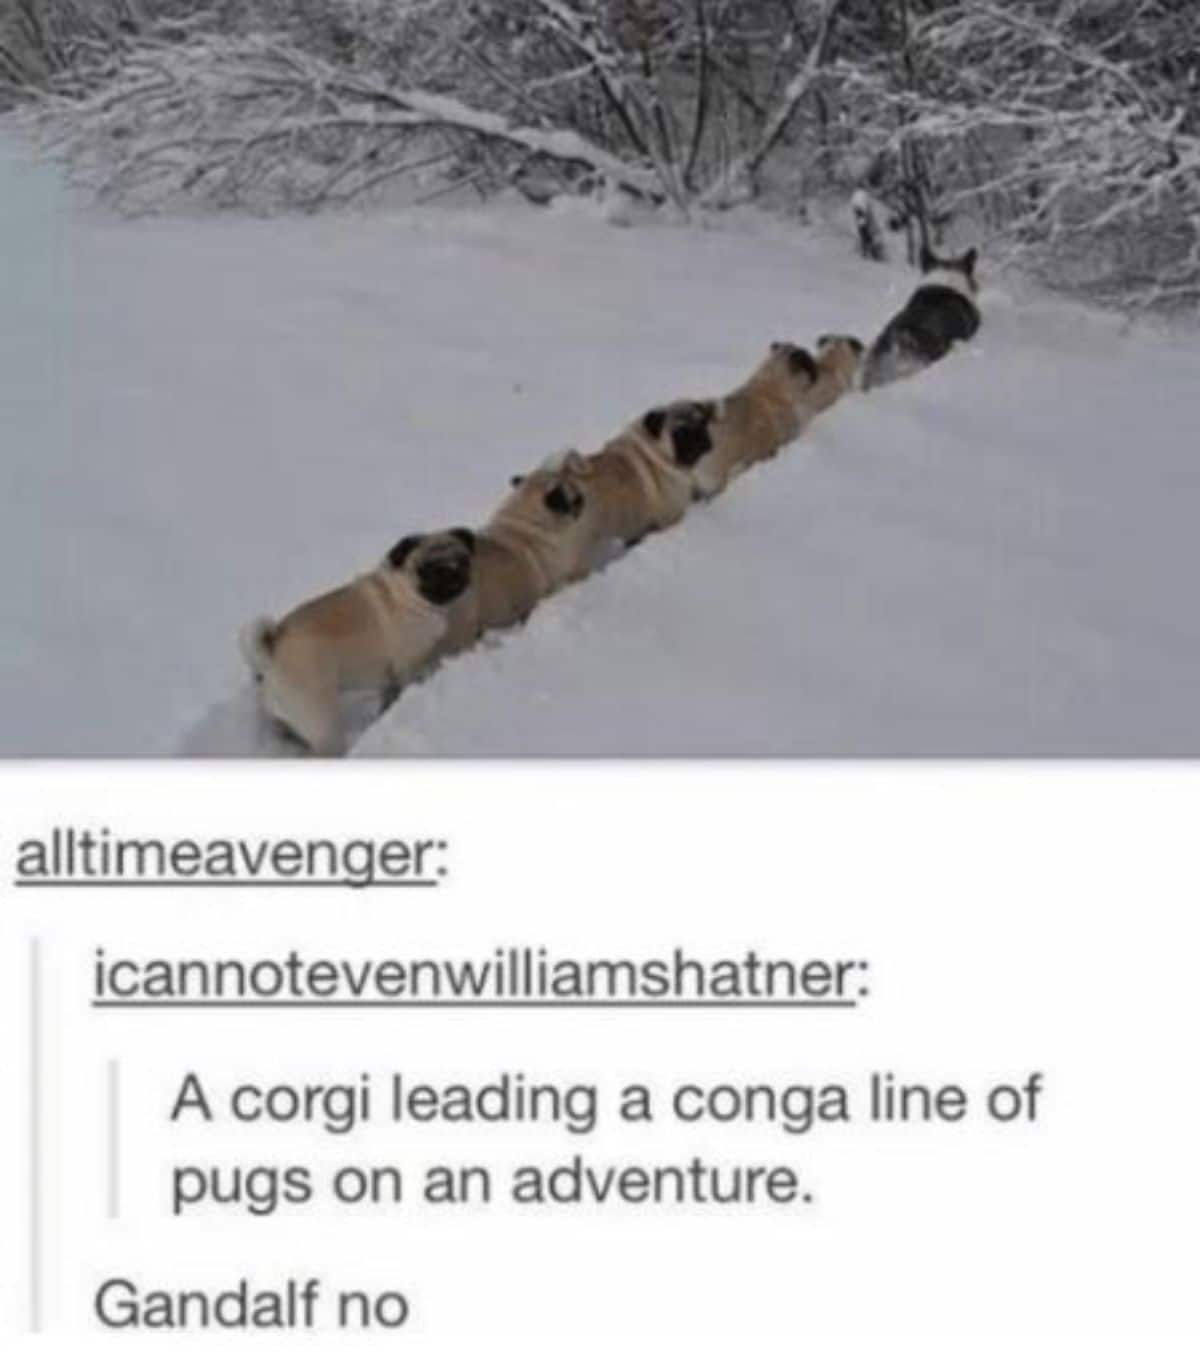 tumblr post of 5 brown pugs in a lin behind a corgi in snow with caption saying a corgi leading a conga line of pugs on an adventure and Gandalf no